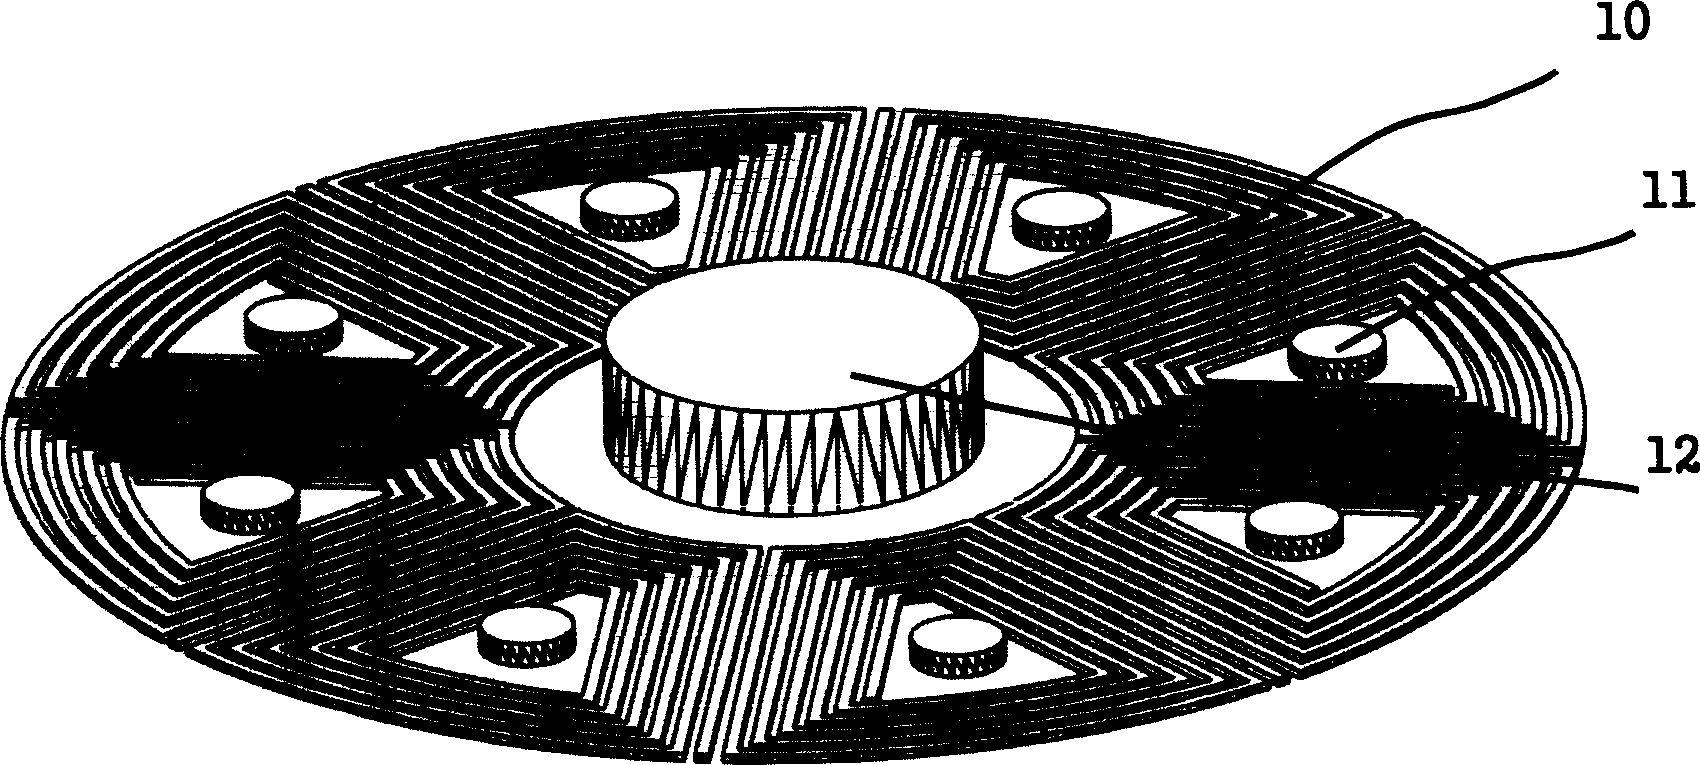 Micro-rotation top with double-stator electromagnetic suspension rotor